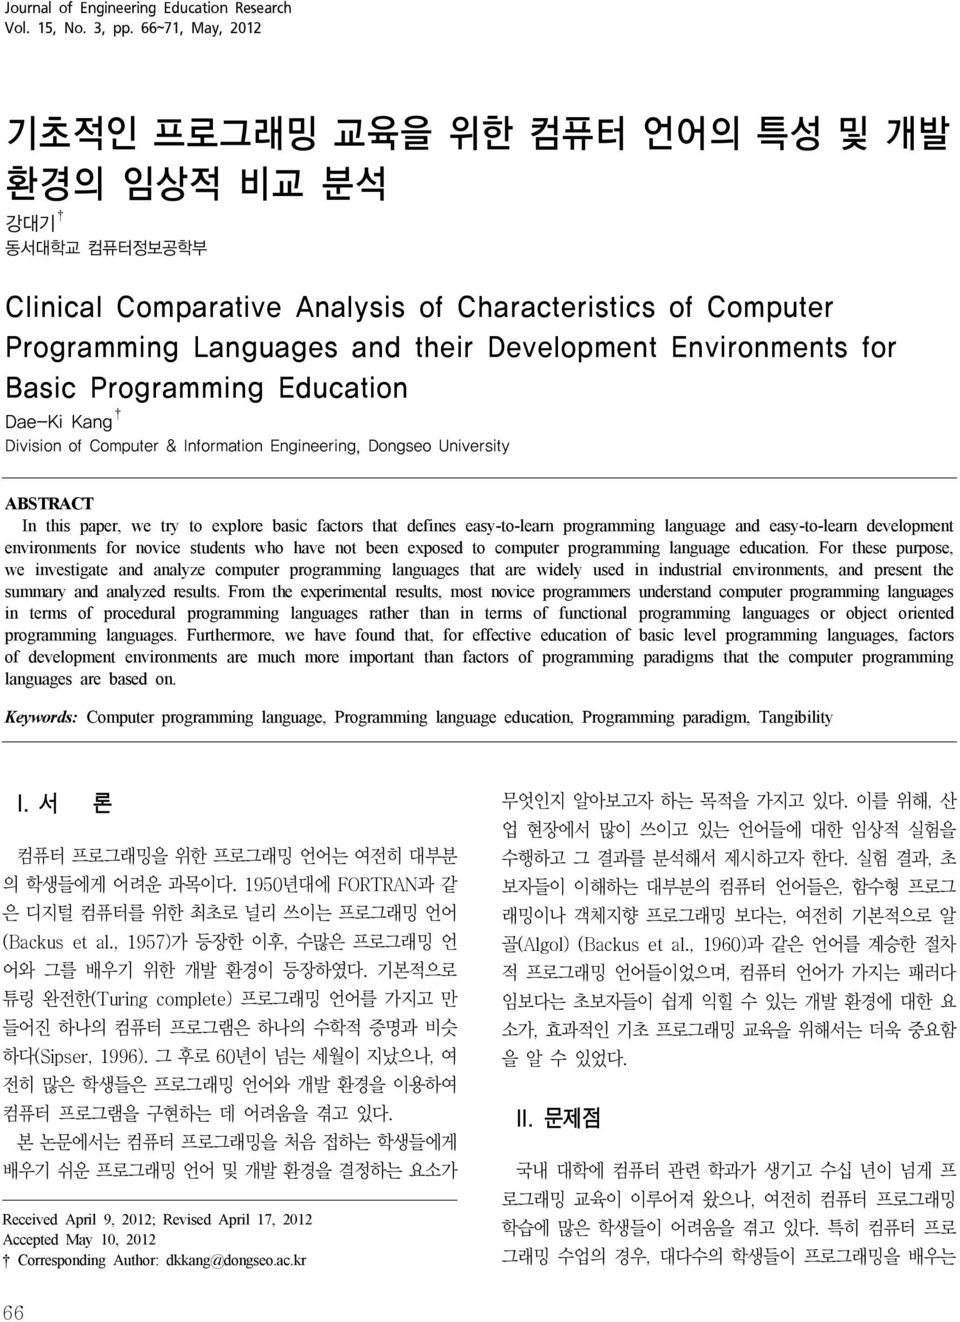 Environments for Basic Programming Education Dae-Ki Kang Division of Computer & Information Engineering, Dongseo University ABSTRACT In this paper, we try to explore basic factors that defines